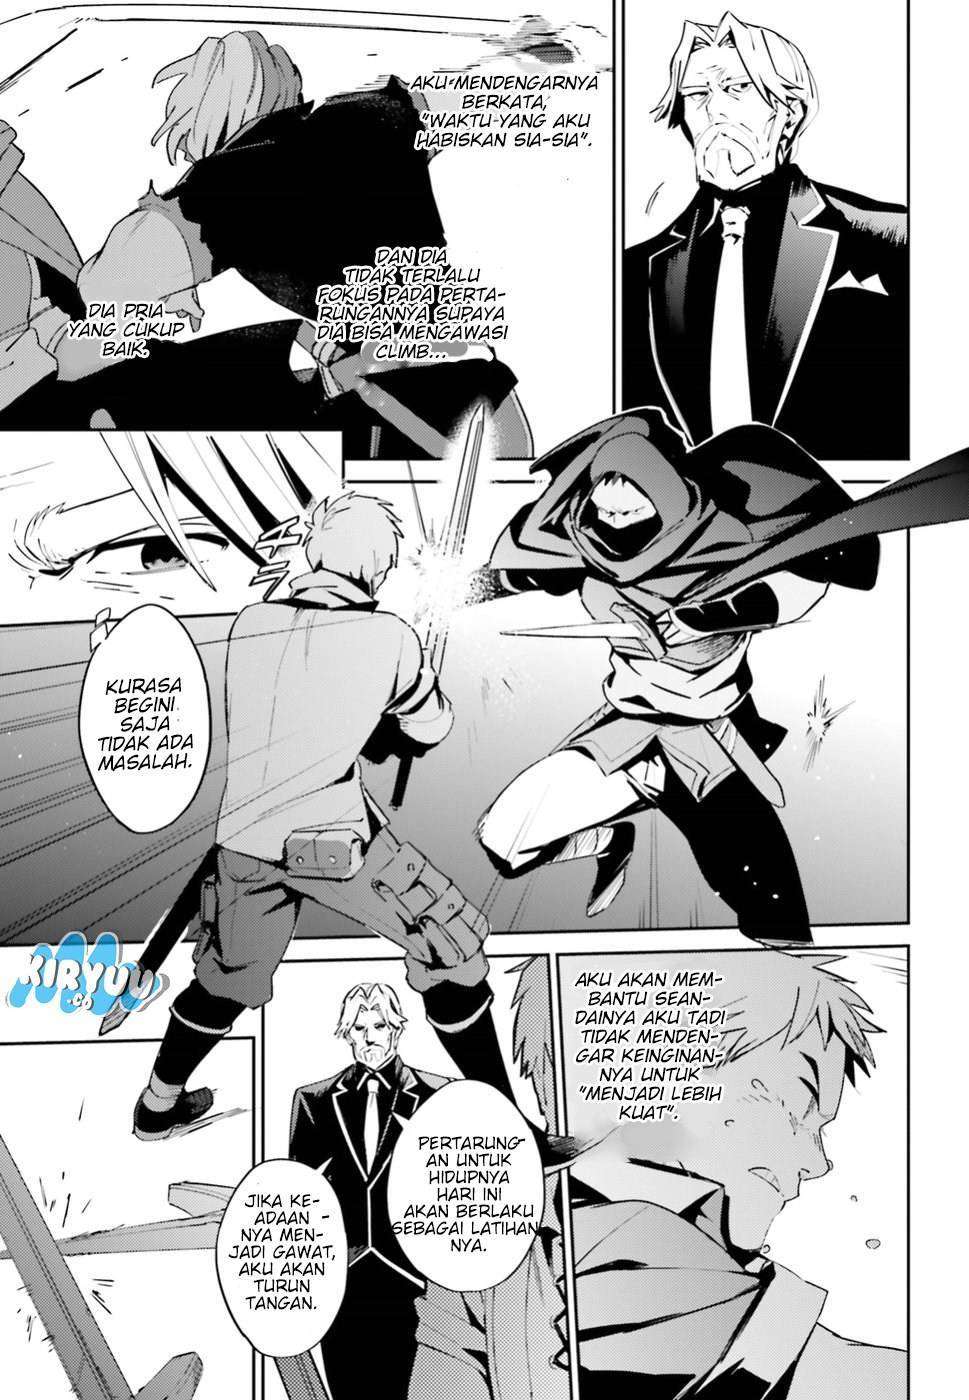 Overlord Chapter 36 Bahasa Indonesia